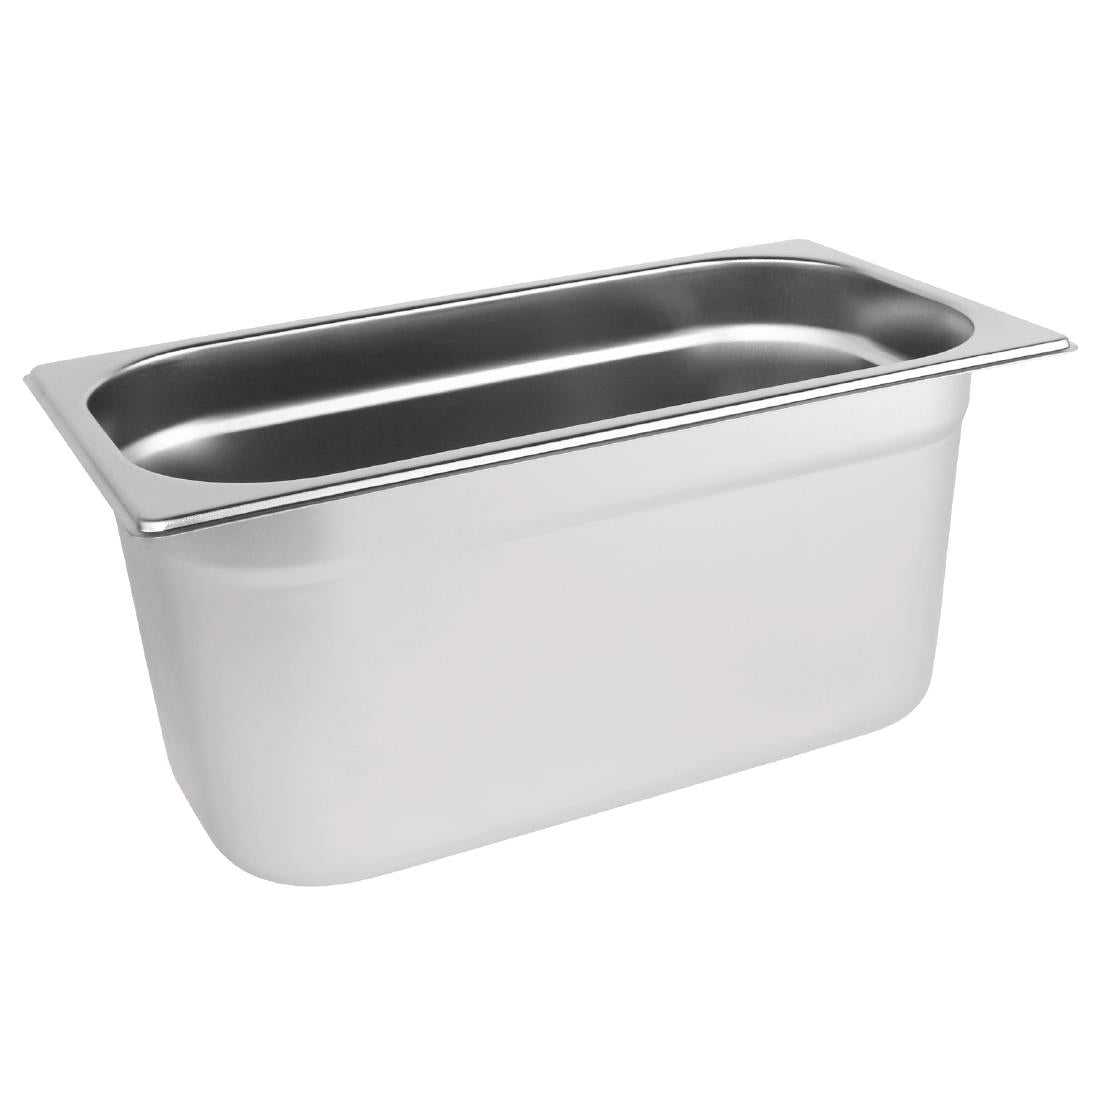 6 Pack of Stainless Steel Gastronorm Pan 1/3 200mm Deep